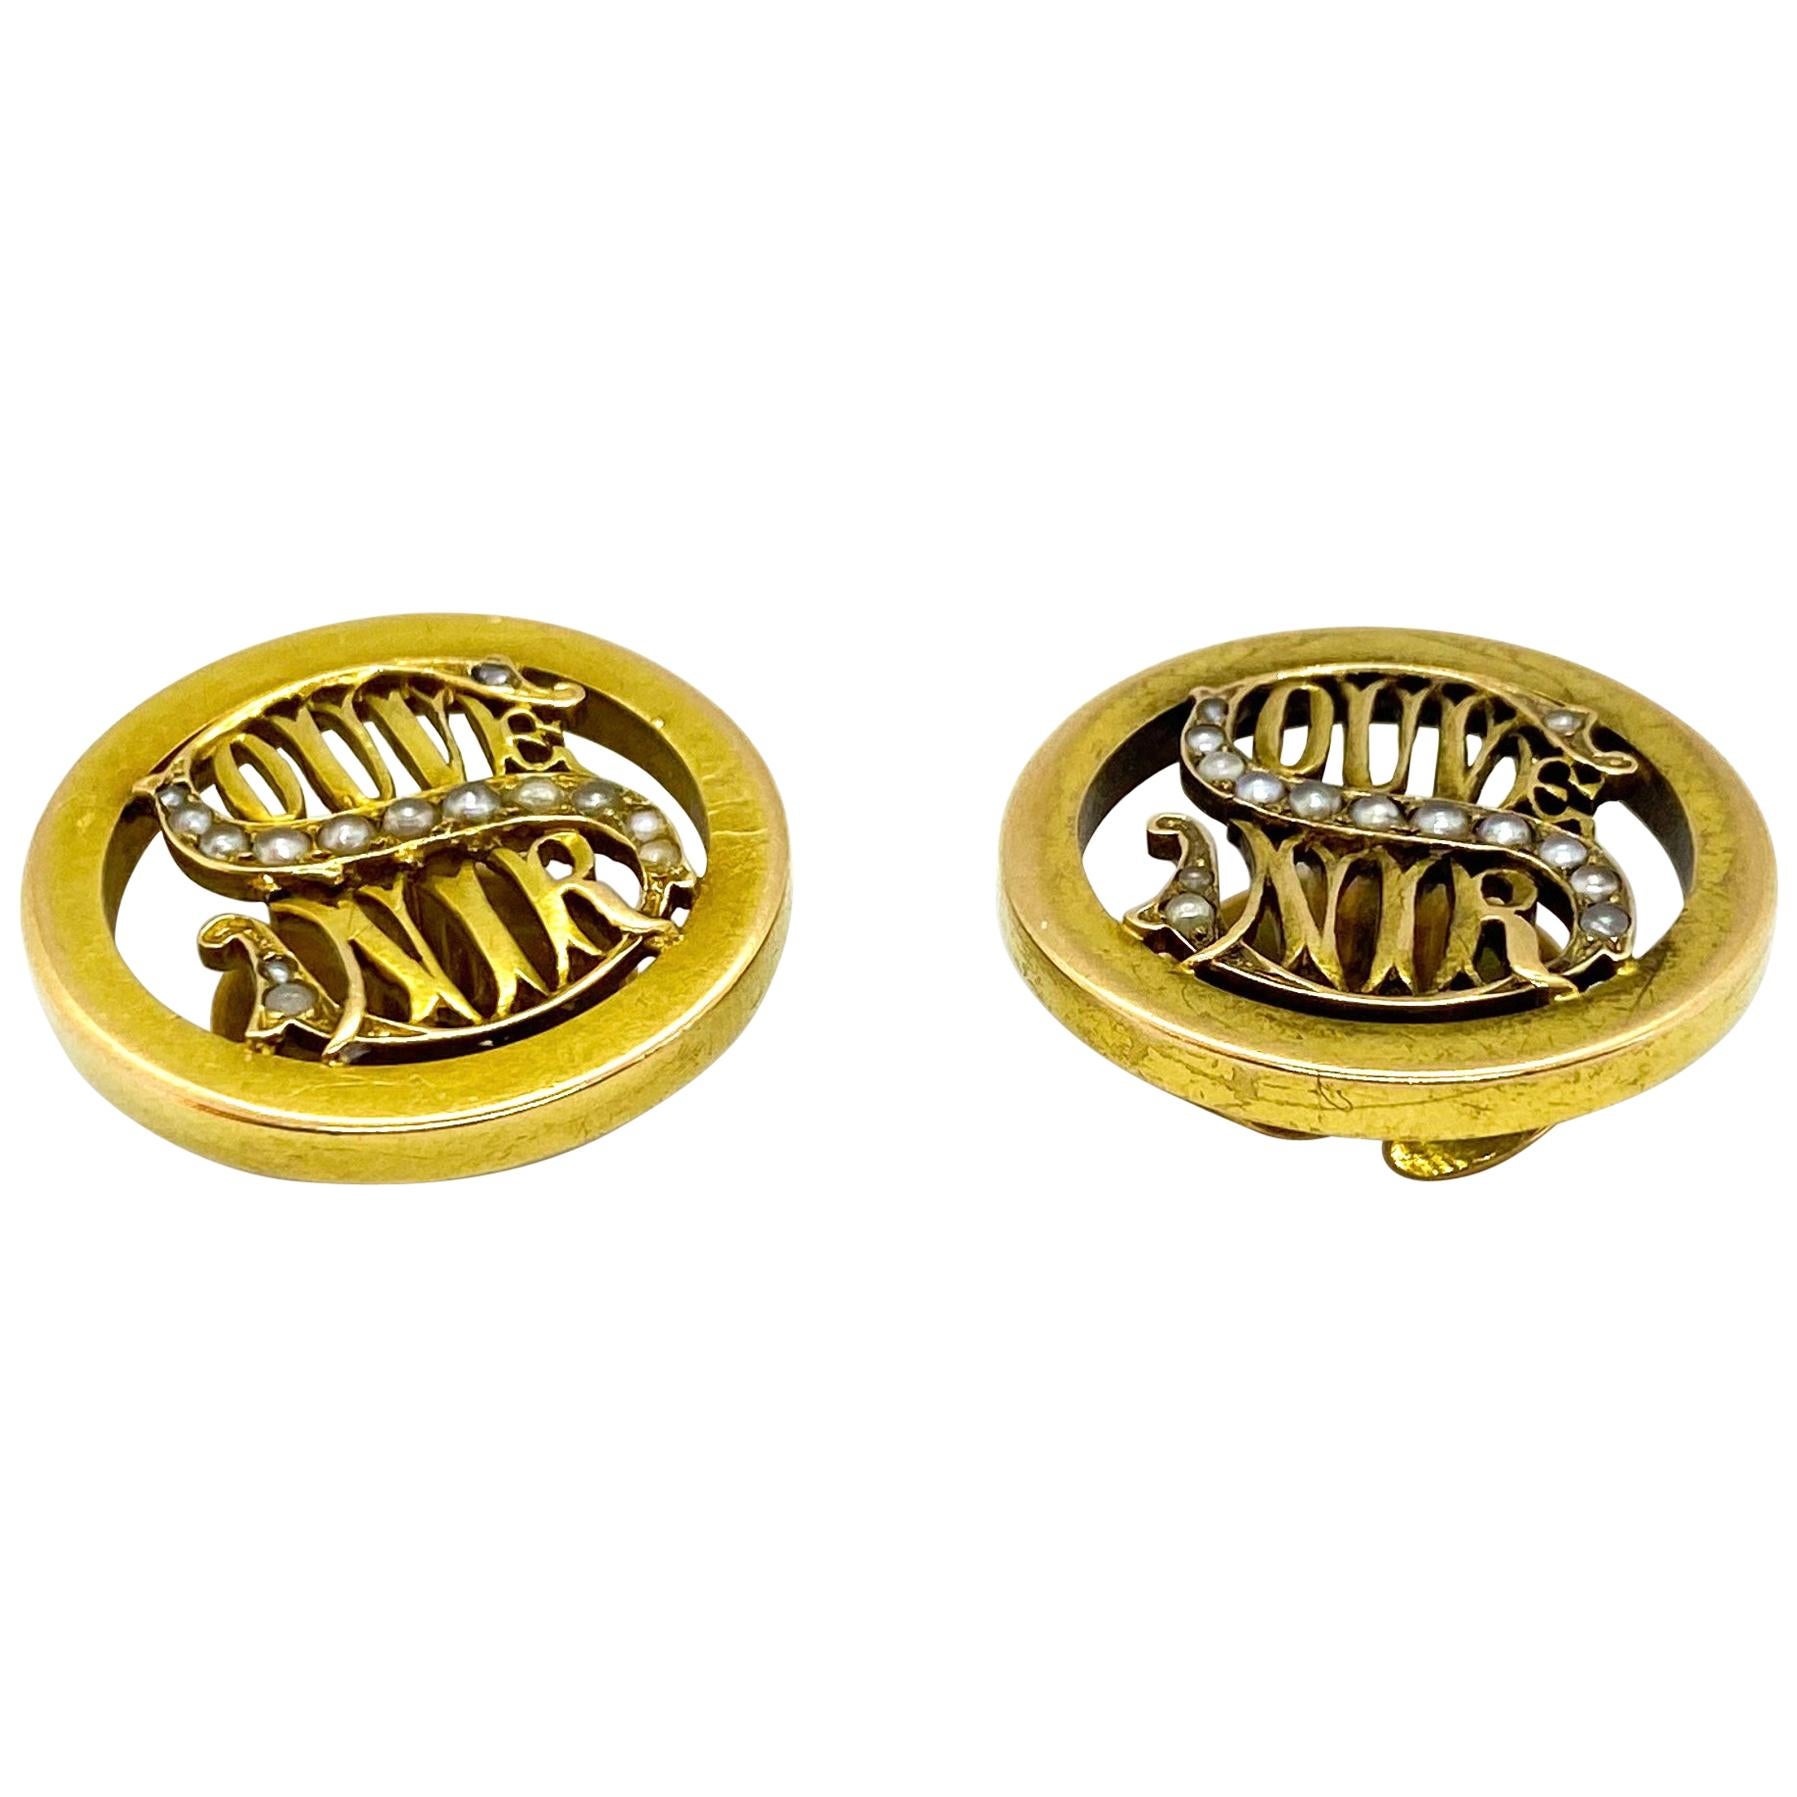 14 Carat Yellow Gold Pearls Russia Souvenir Cufflinks For Sale